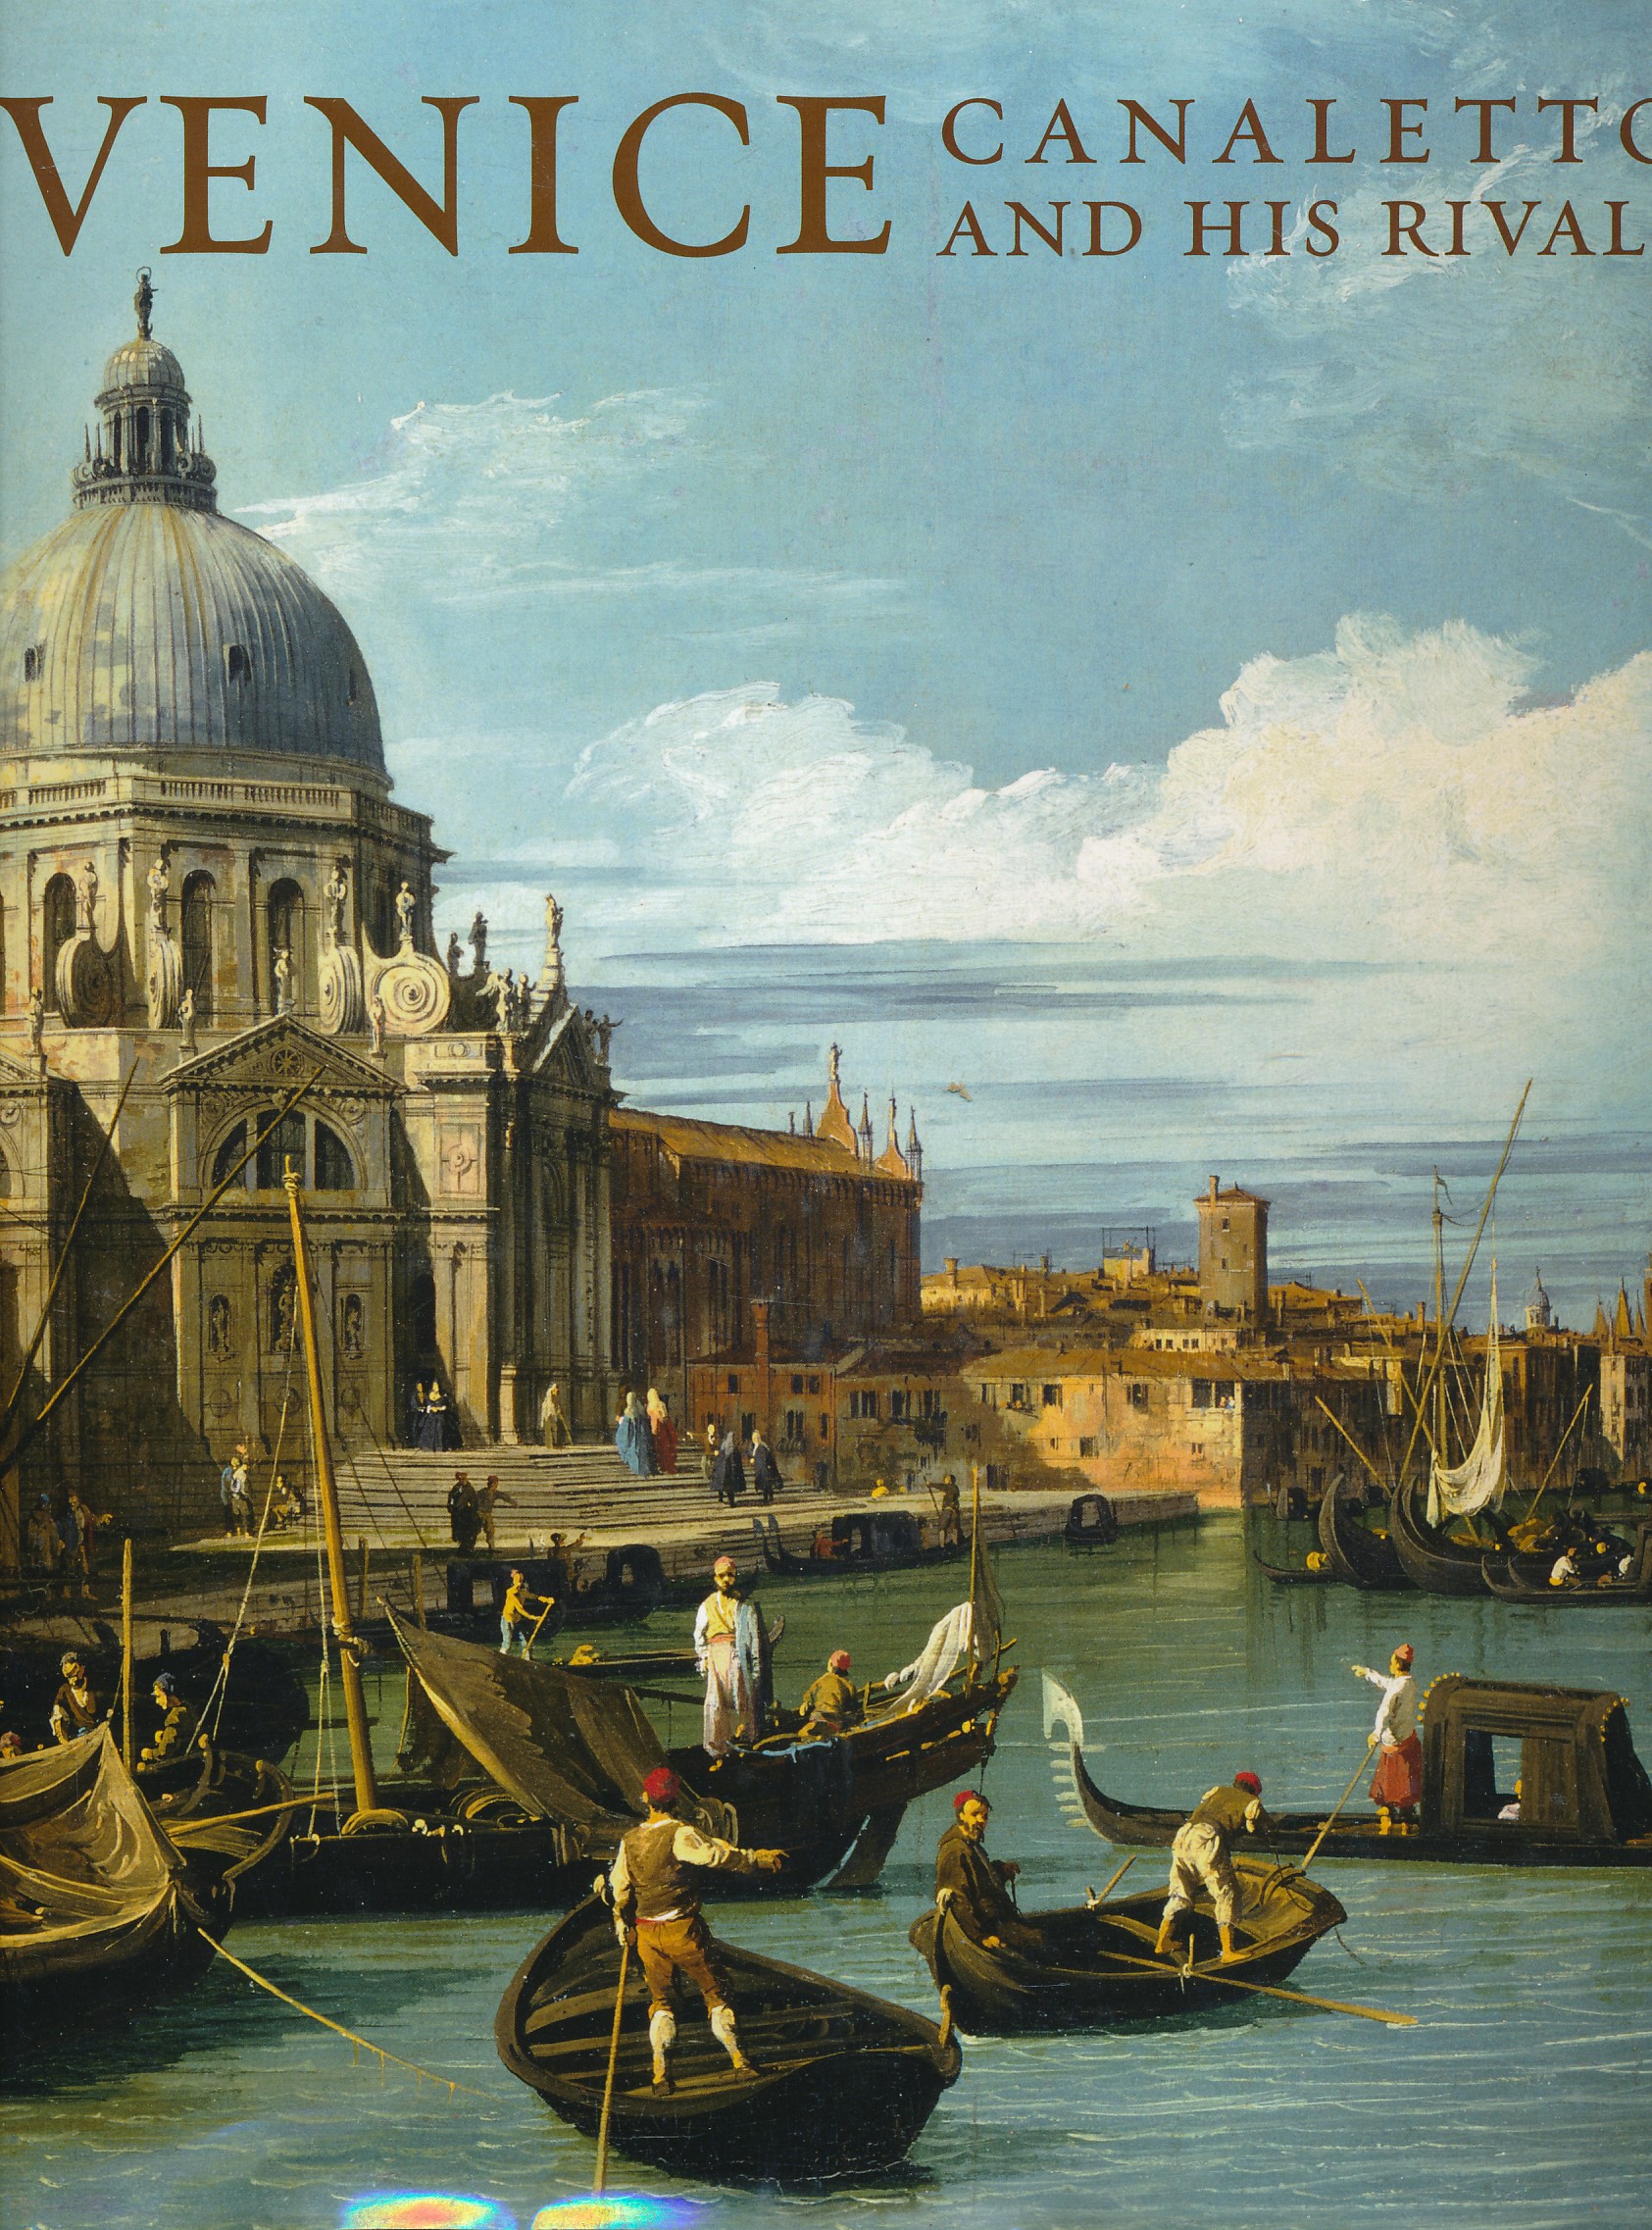 Venice. Canaletto and His Rivals